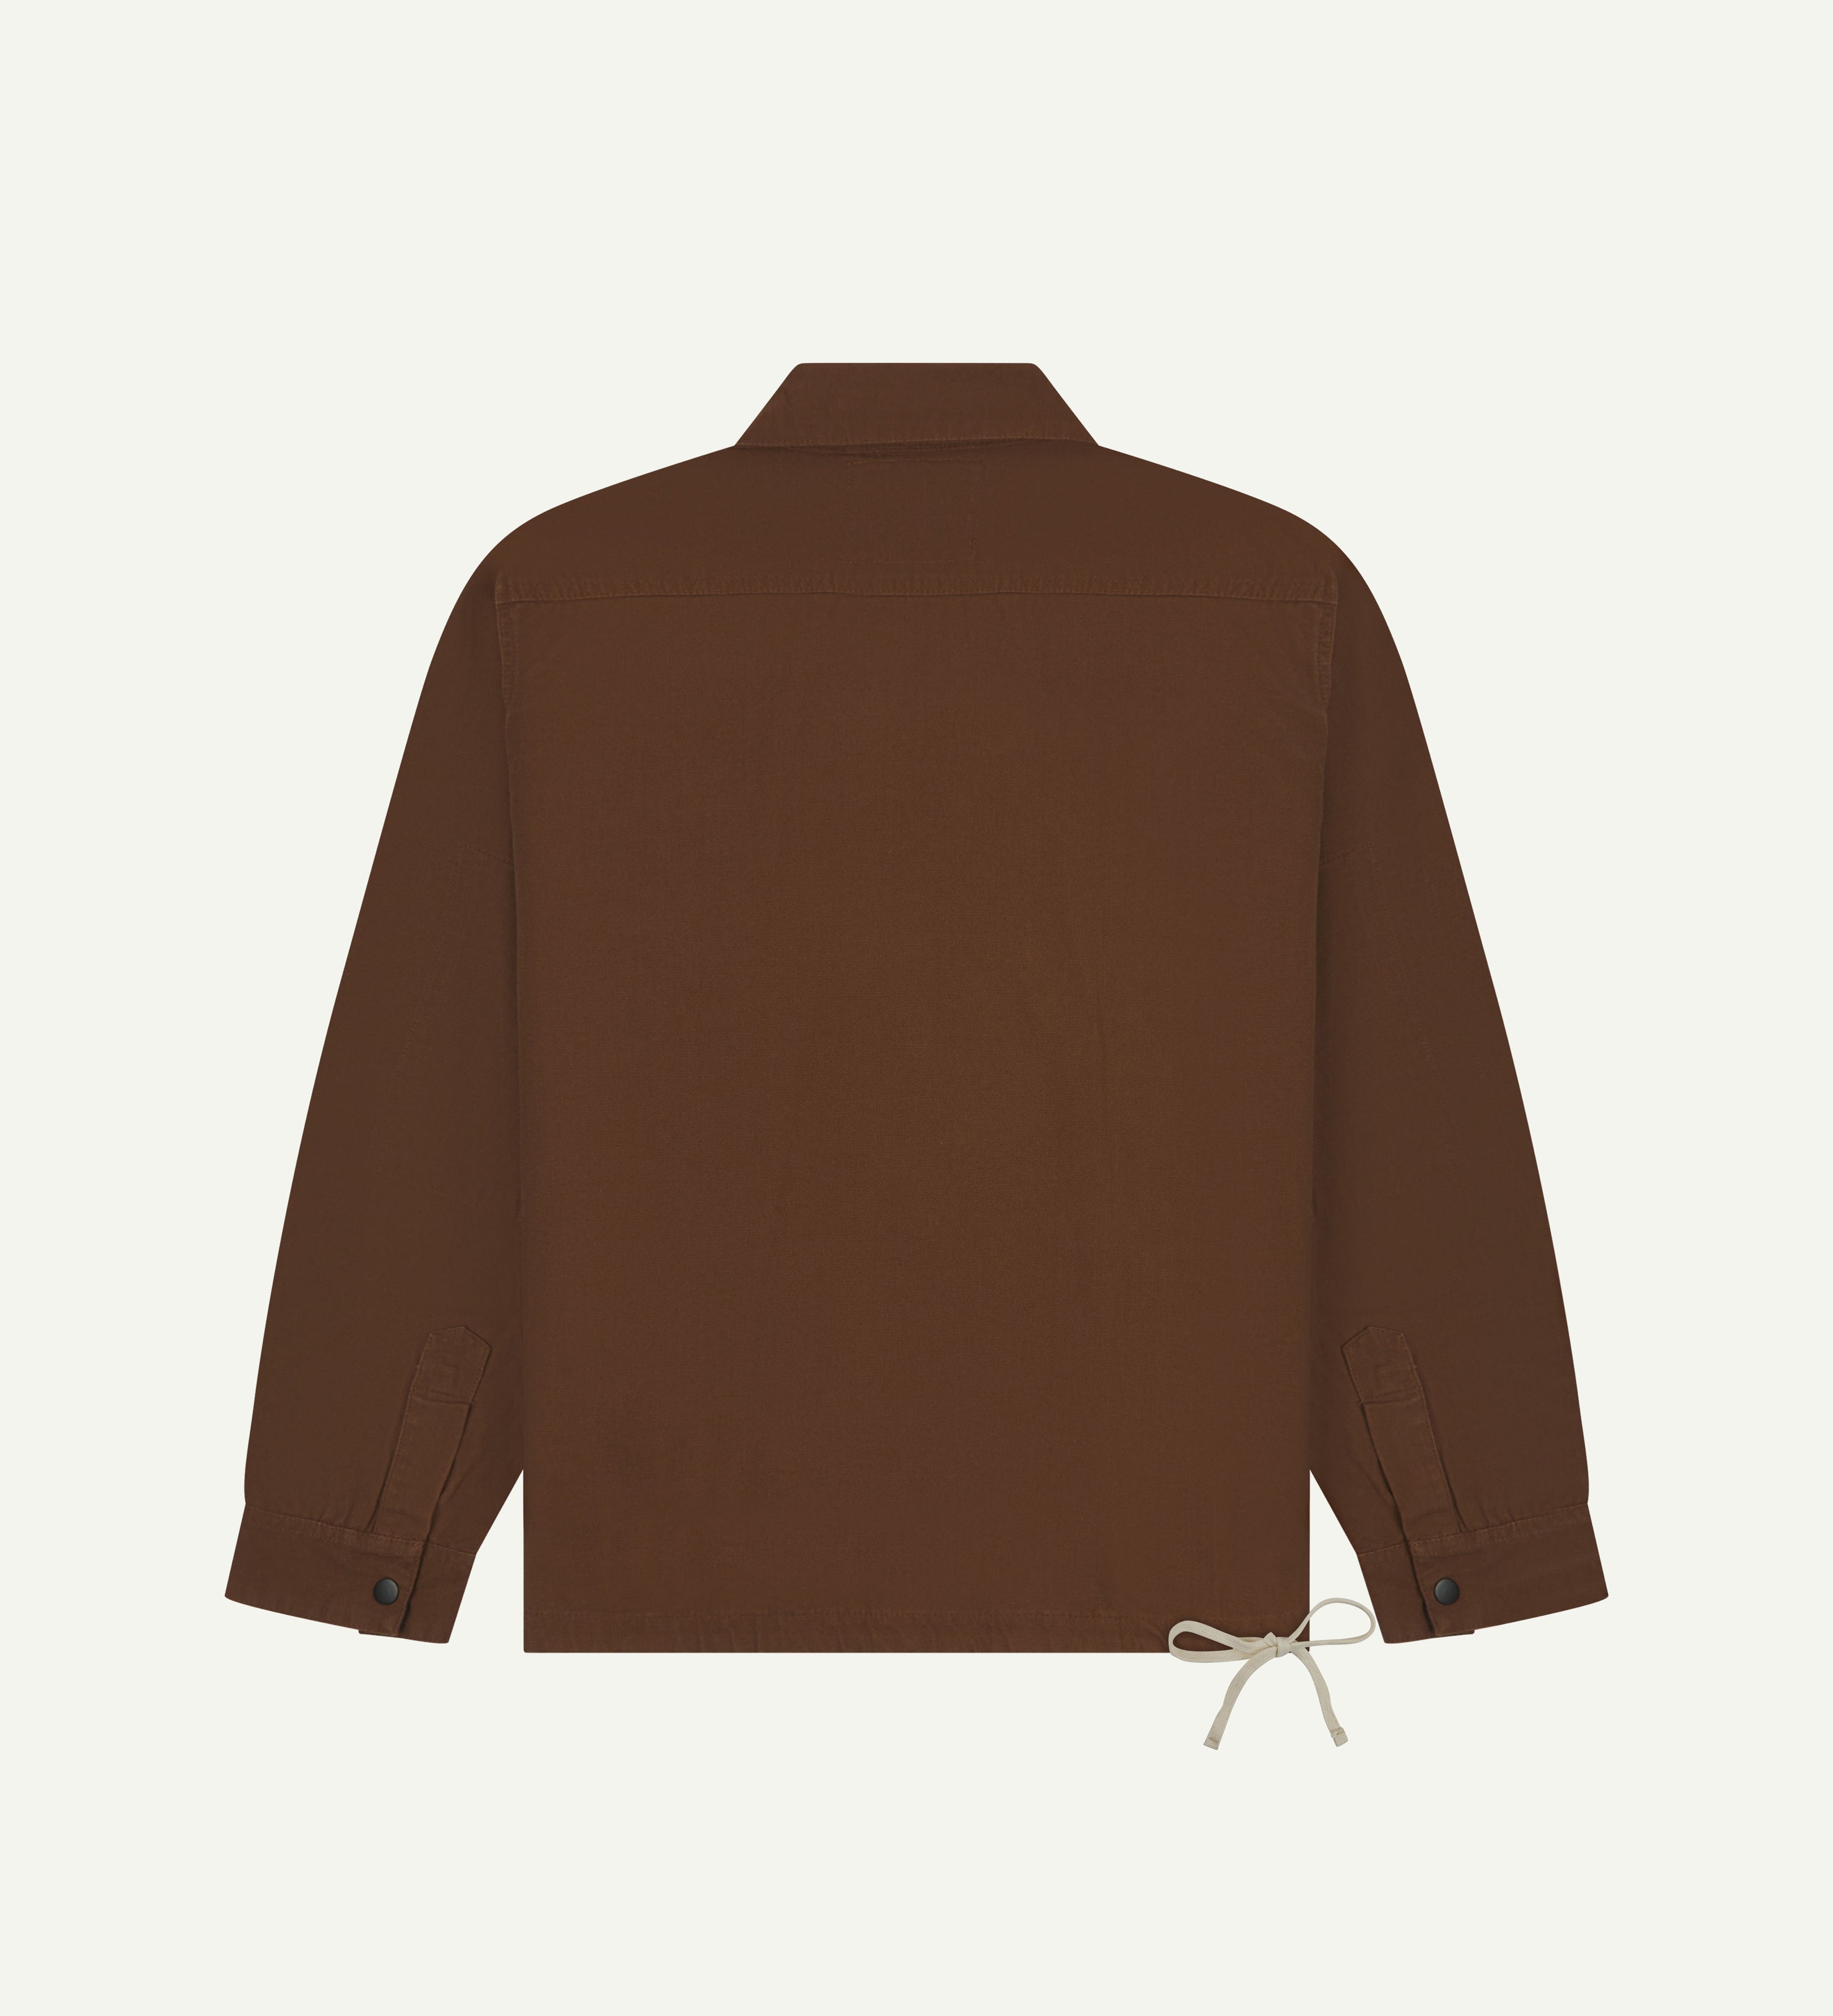 Back flat view of Uskees chocolate-brown organic cotton coach jacket.